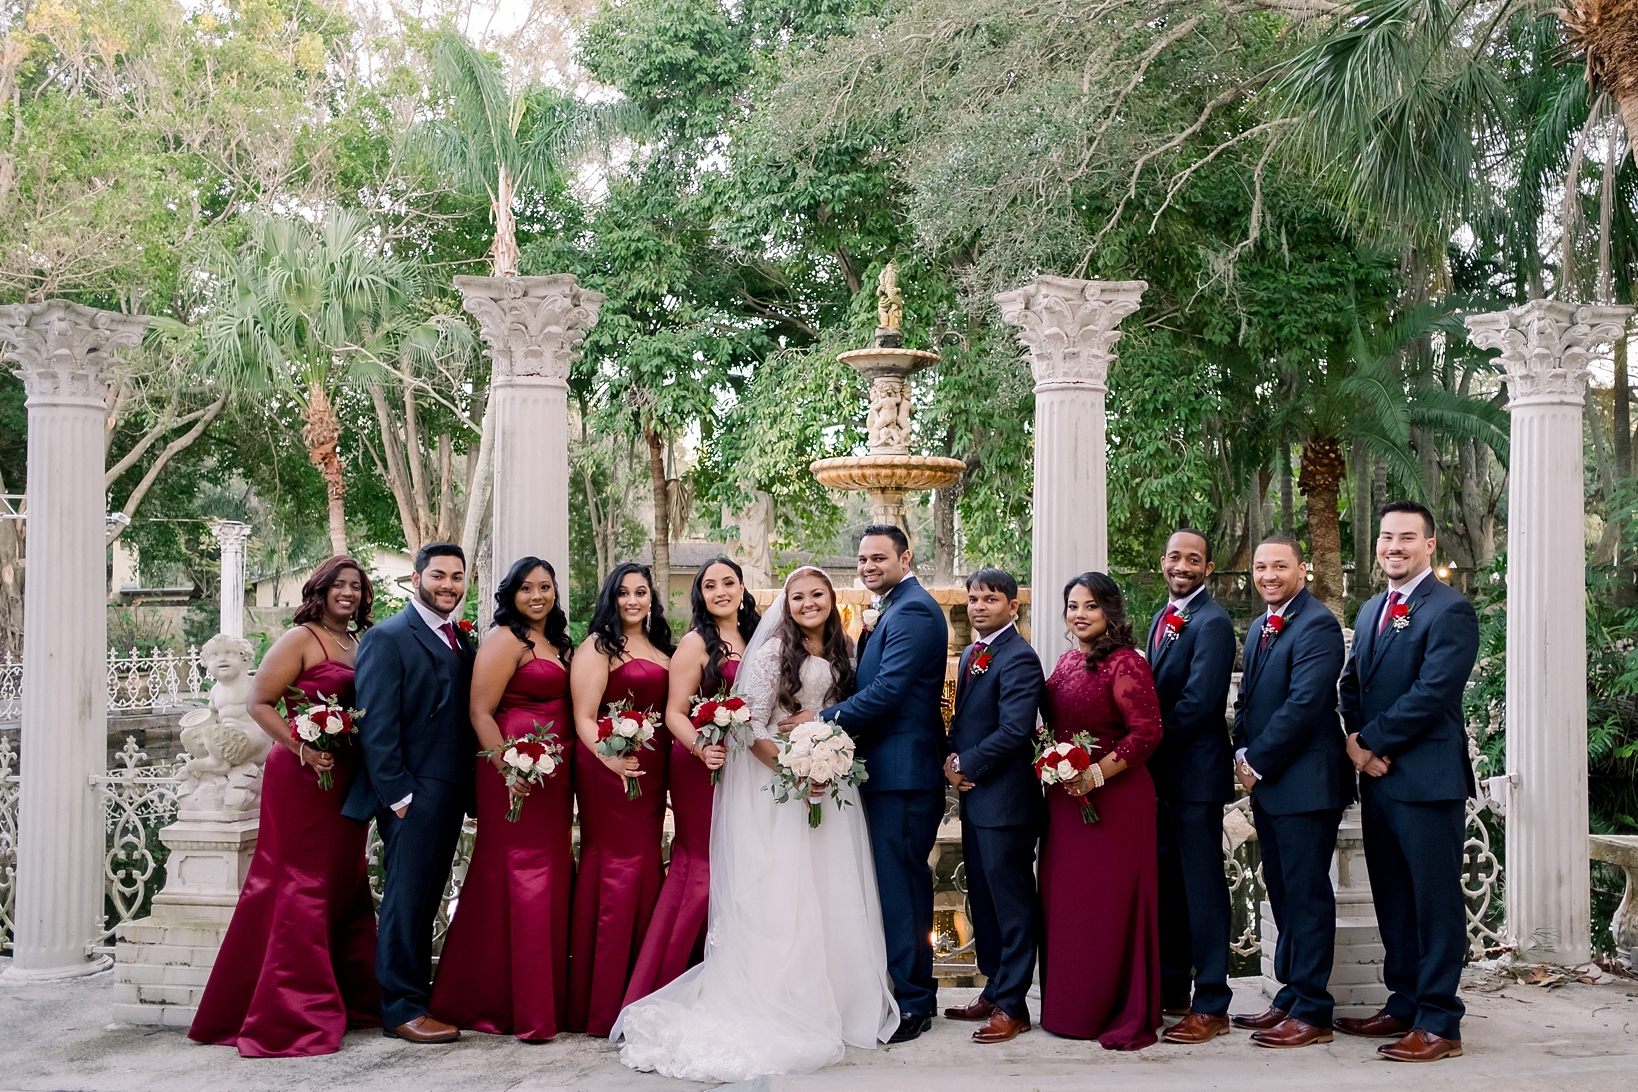 The entire wedding party posing next to the columns of the Kapok Tree in Clearwater, Florida